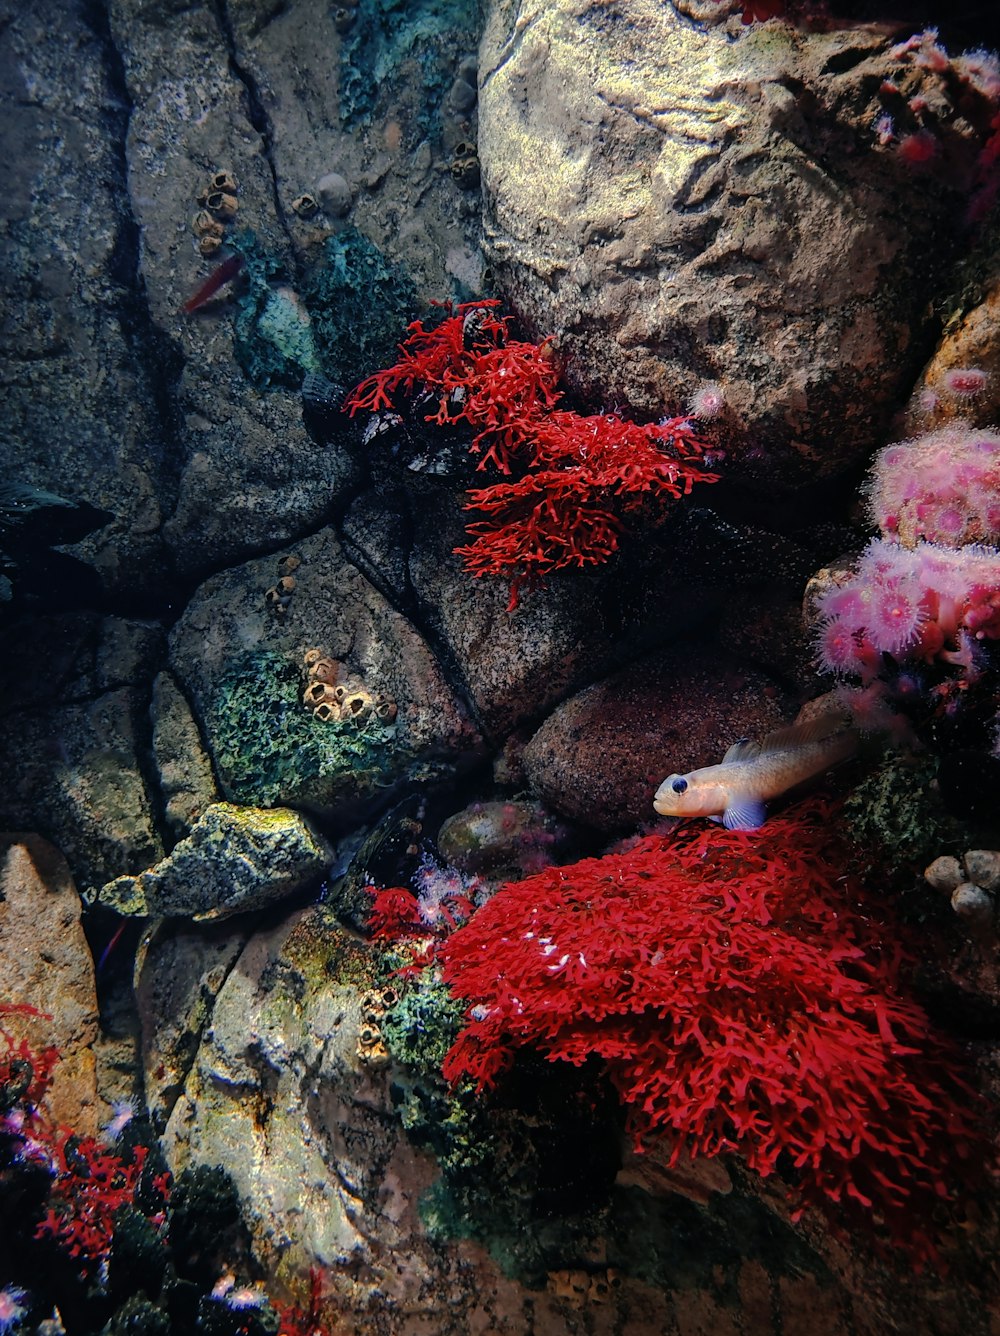 a fish is swimming in the water near some corals